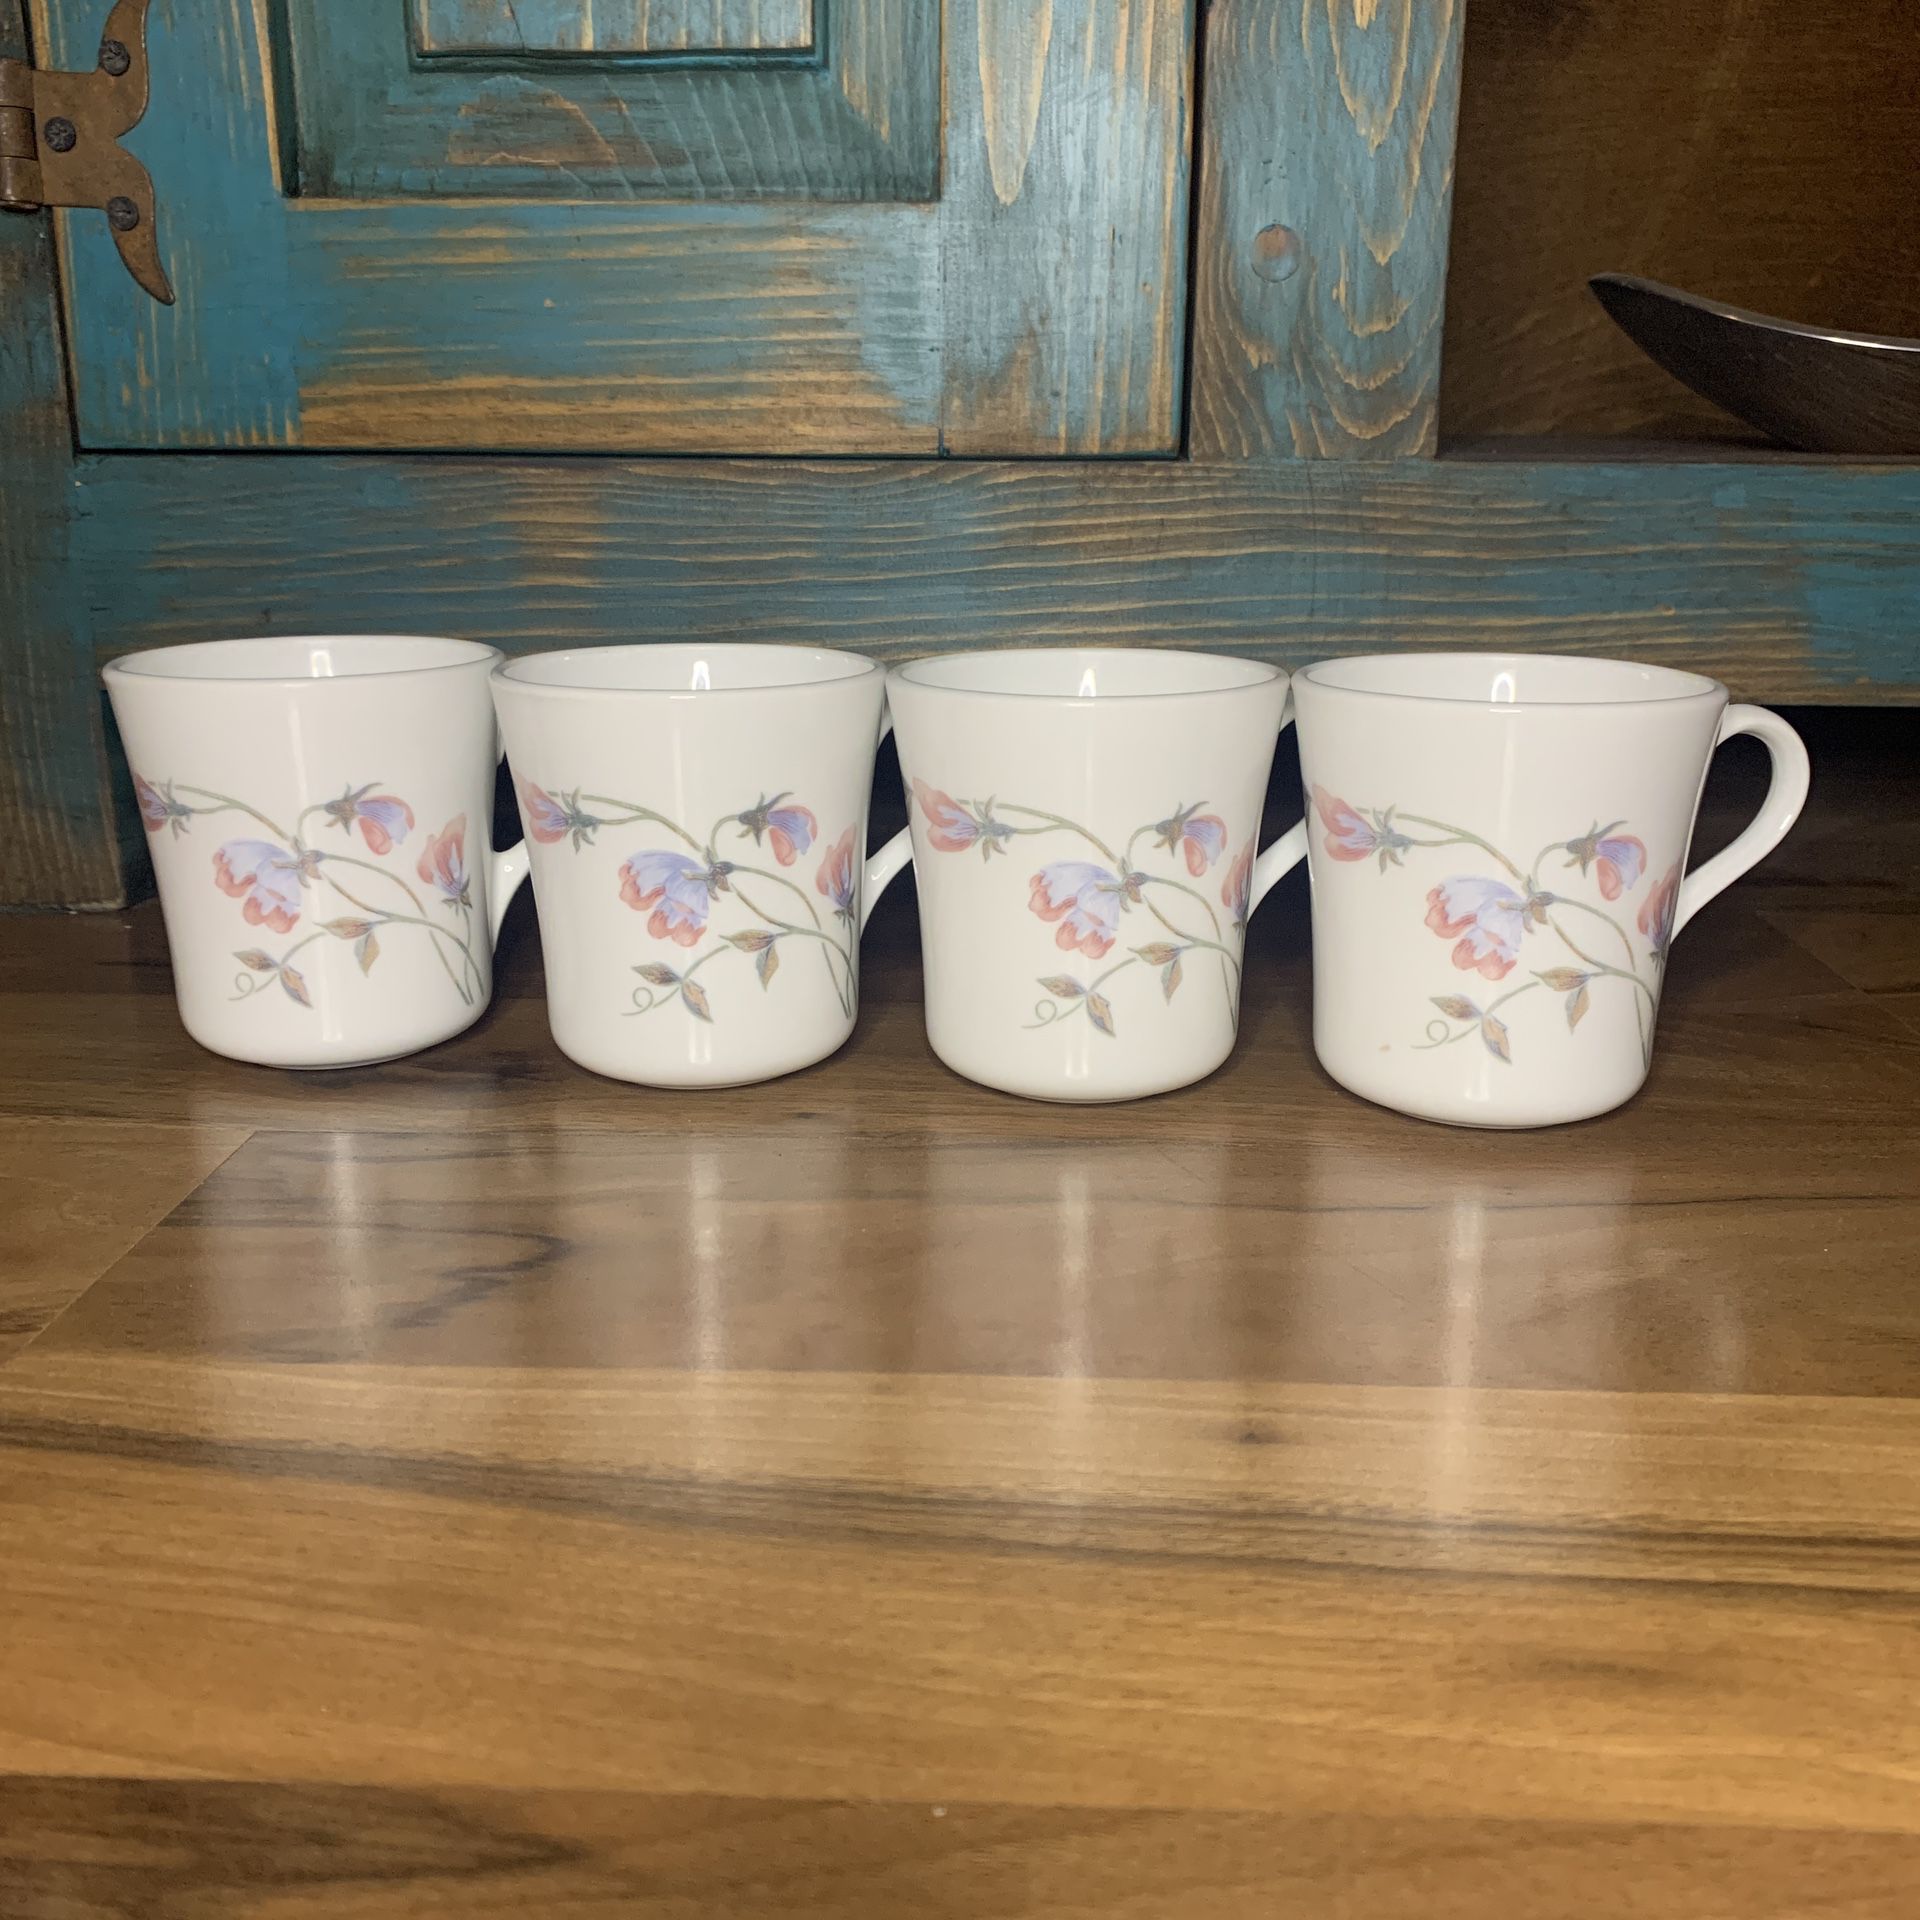 4 Corning Ware White Pink Blue Floral Coffee Cups Mugs